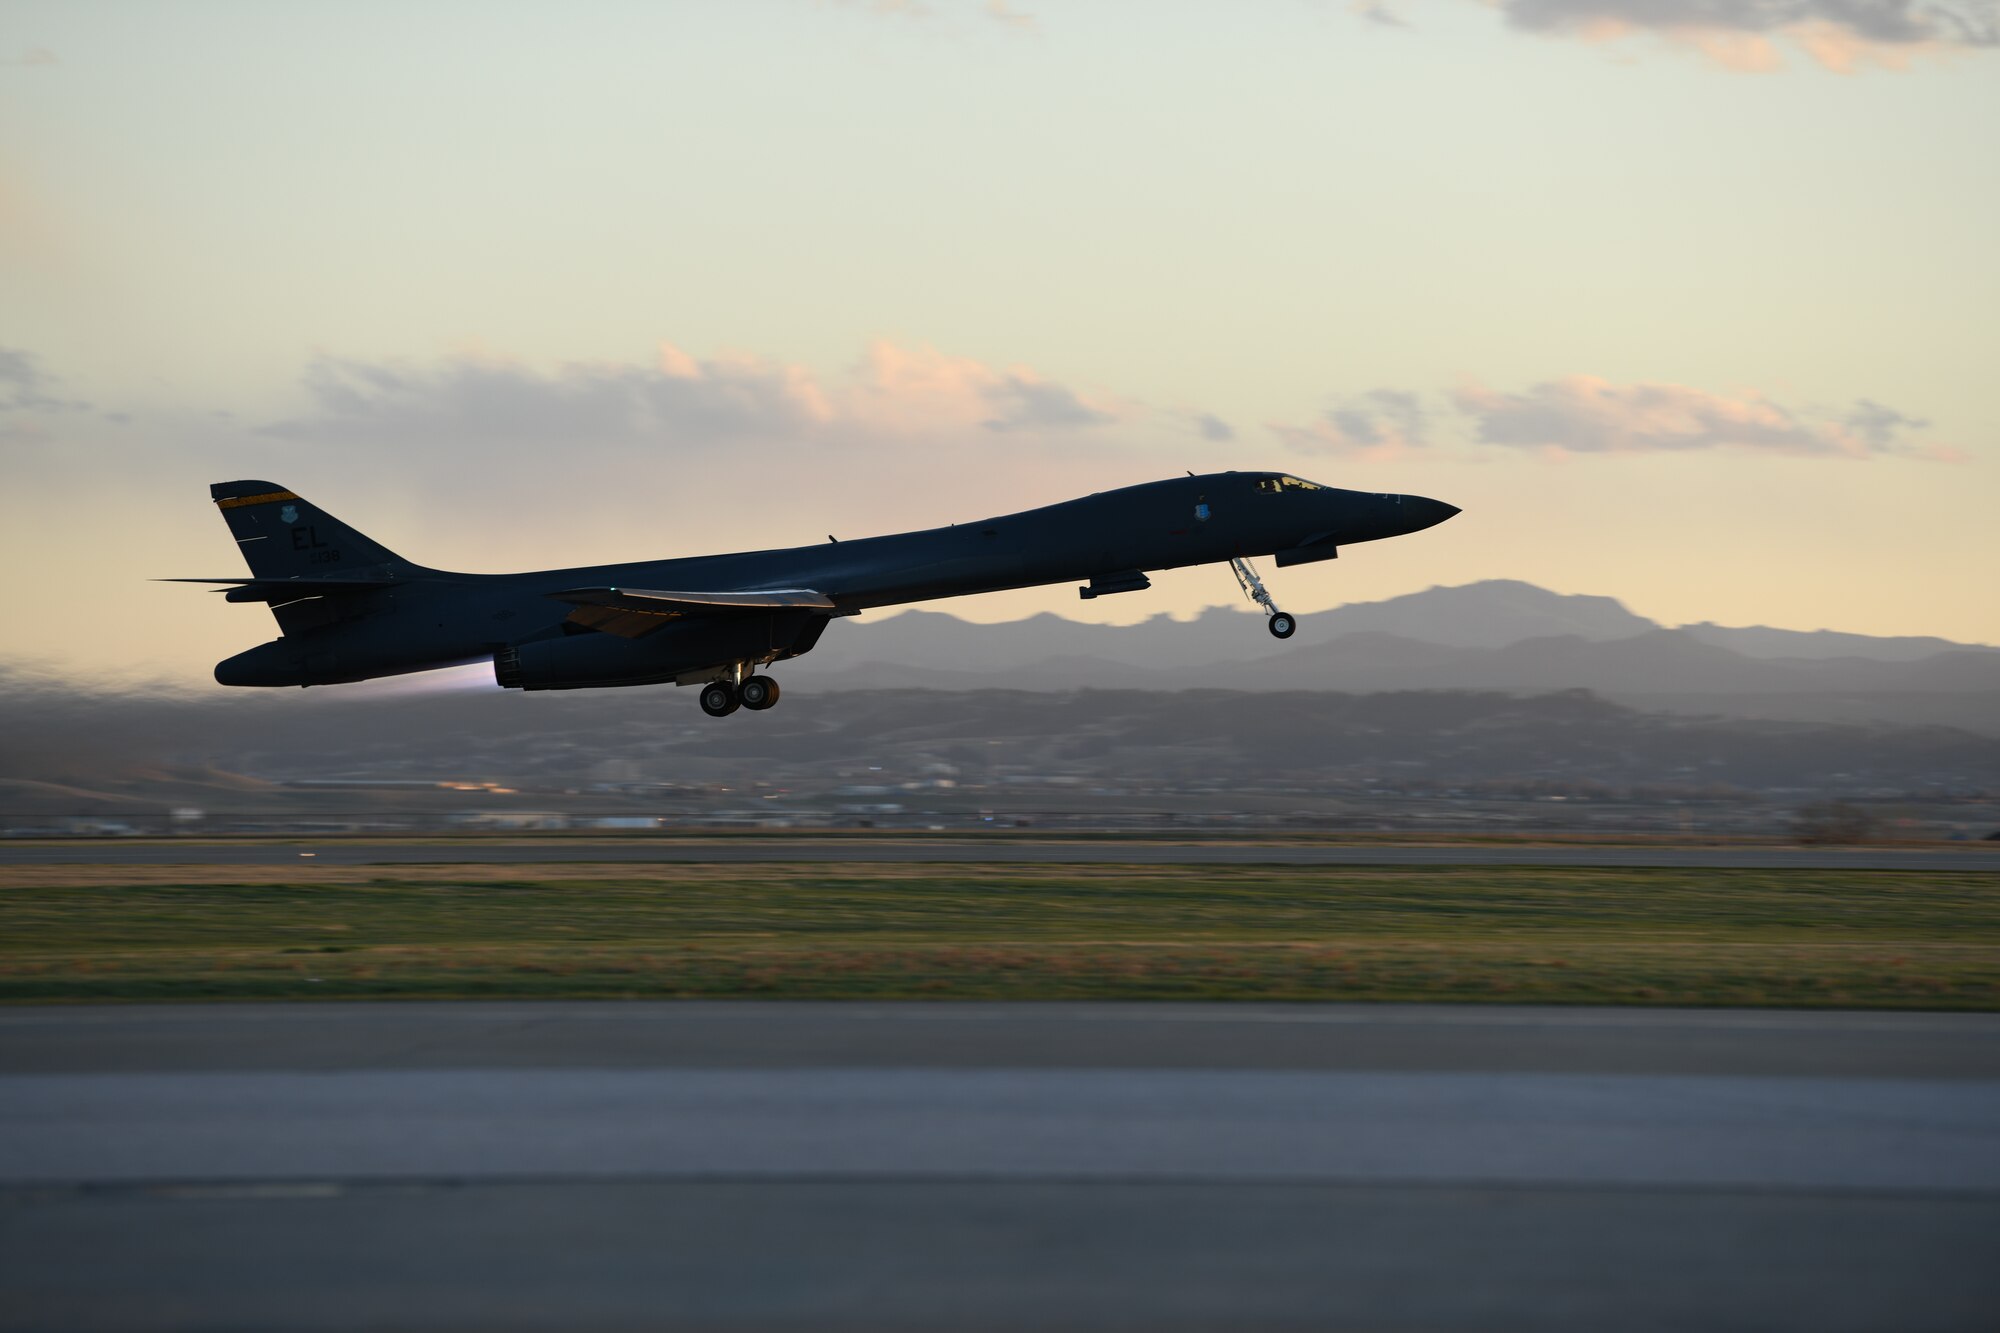 A B-1B Lancer assigned to the 28th Bomb Wing takes off from Ellsworth Air Force Base, S.D., April 28, 2020, to support a Bomber Task Force mission in the Indo-Pacific region. This operation demonstrates the U.S. Air Force’s dynamic force employment model in line with the National Defense Strategy’s objectives of strategic predictability and operational unpredictability. (U.S. Air Force photo by Senior Airman Nicolas Erwin)